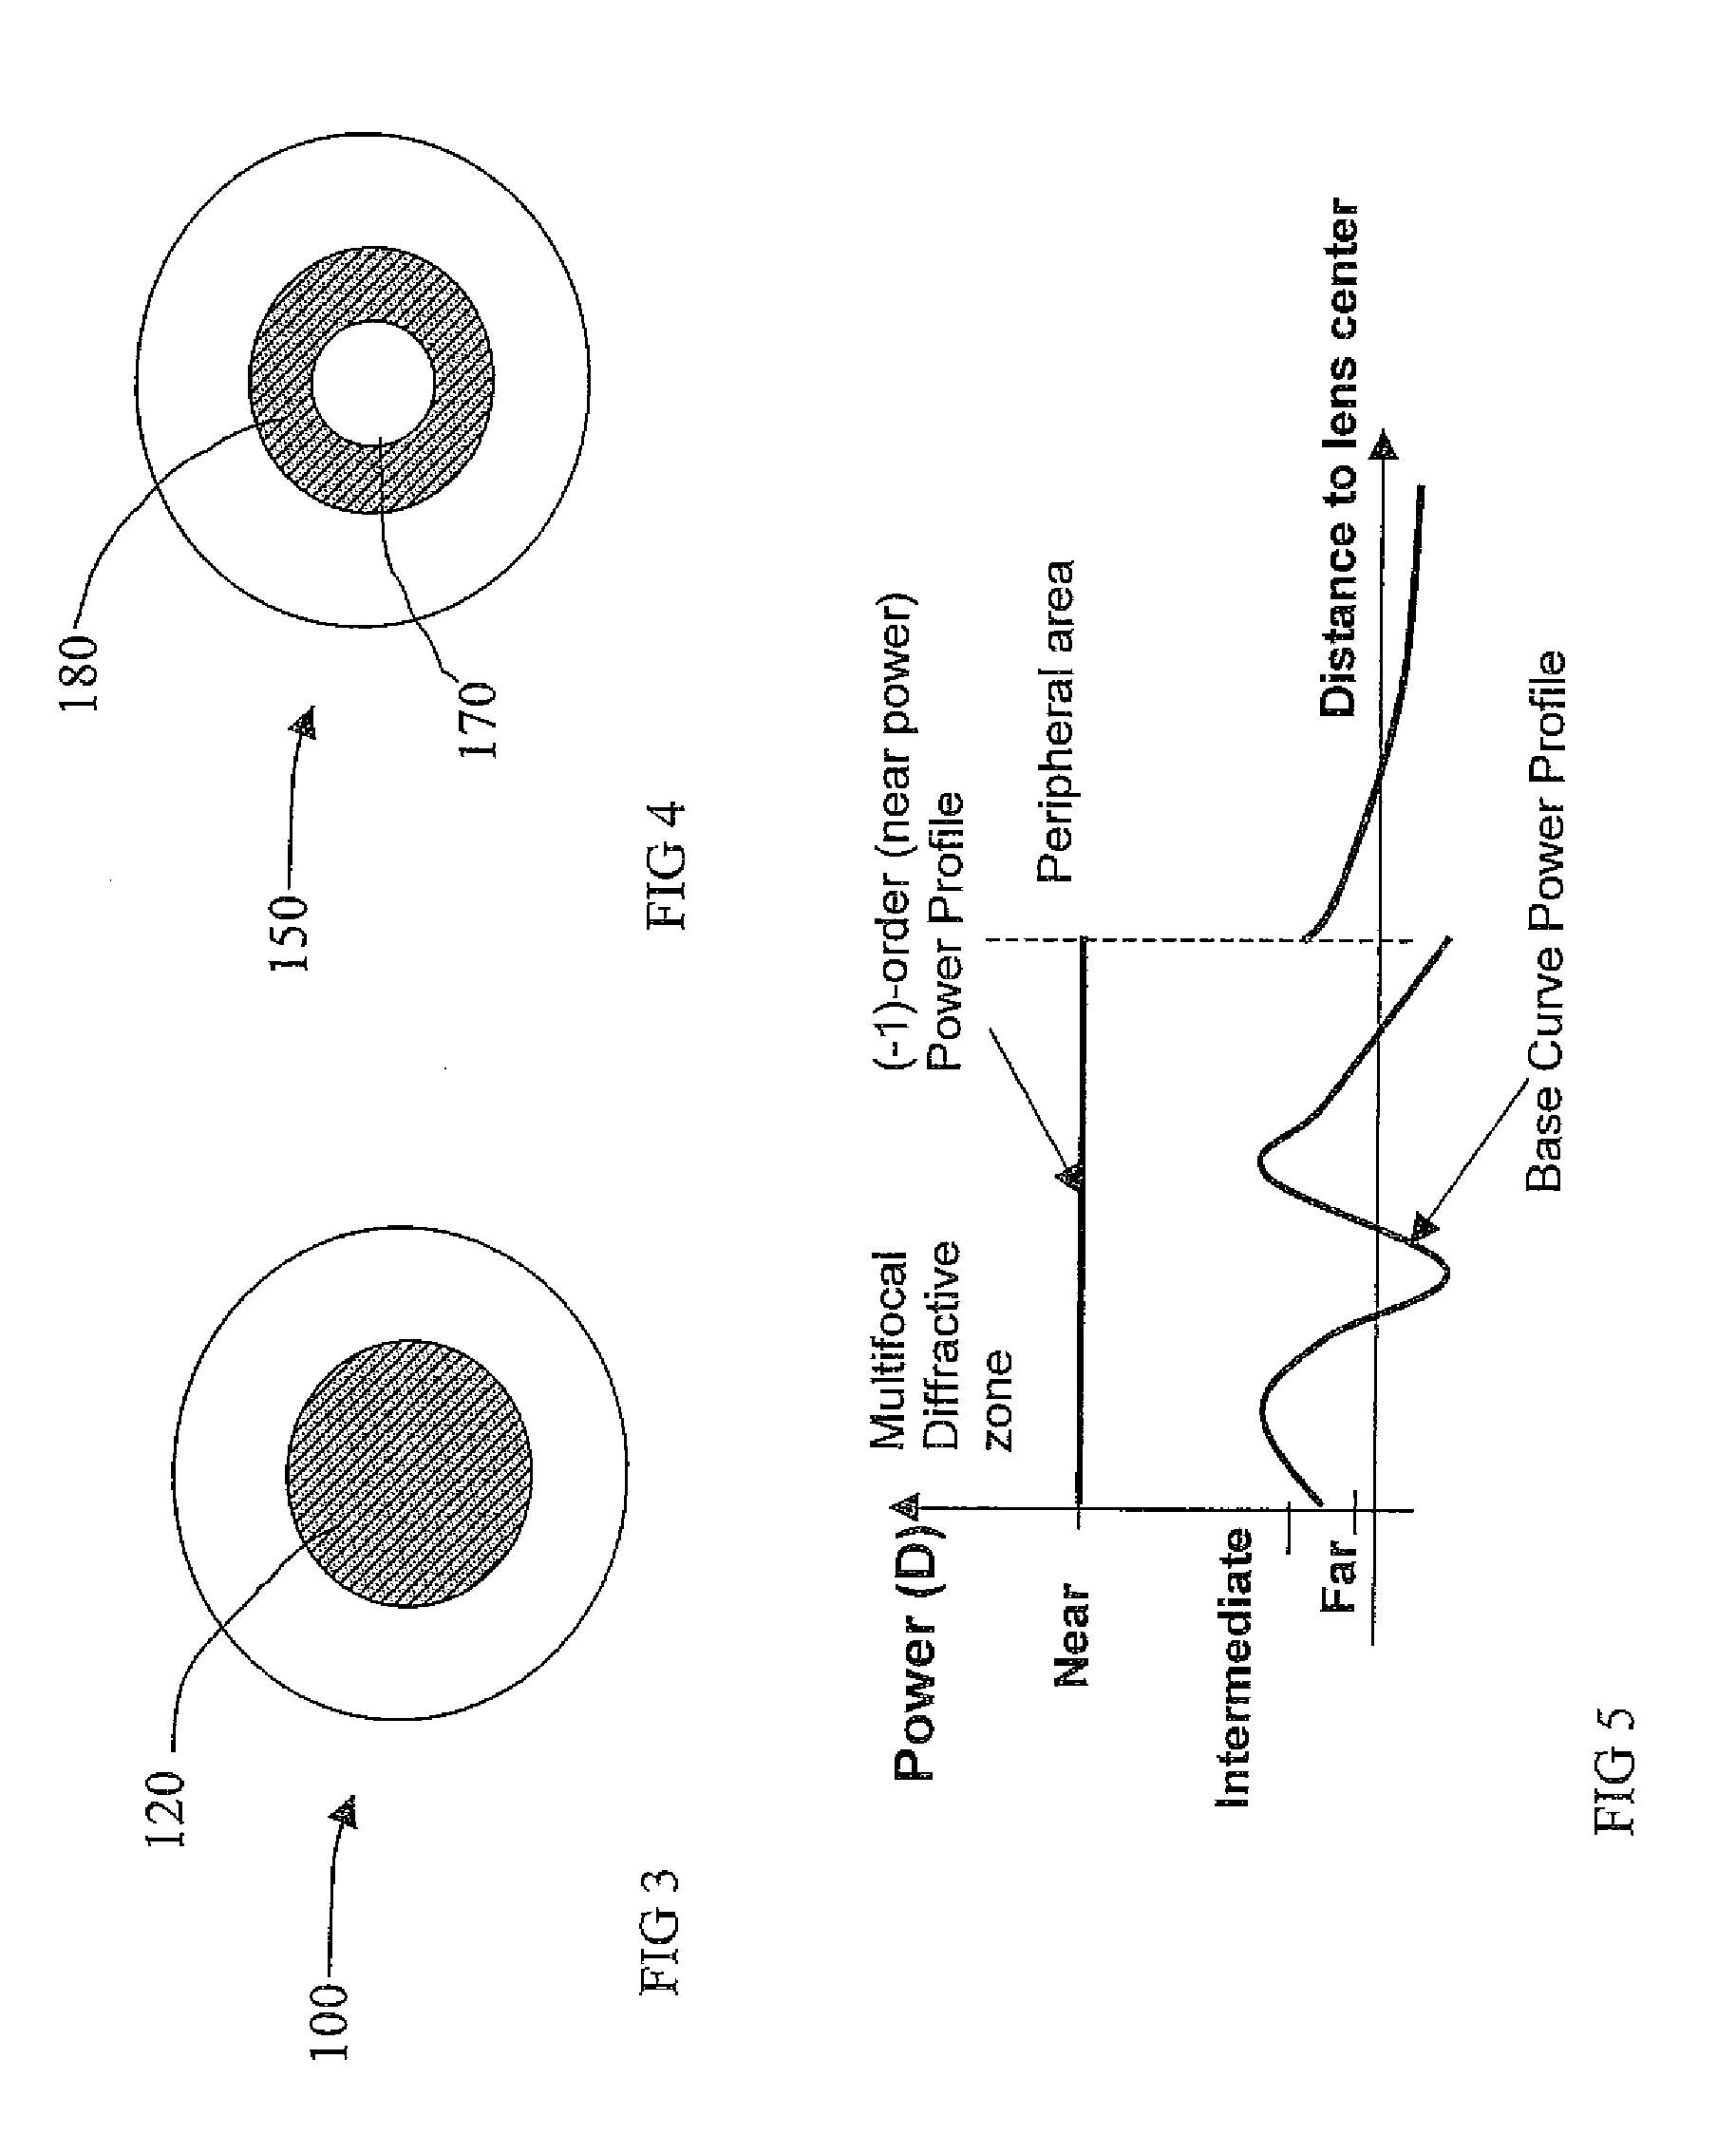 Multifocal diffractive ophthalmic lens with multifocal base surface